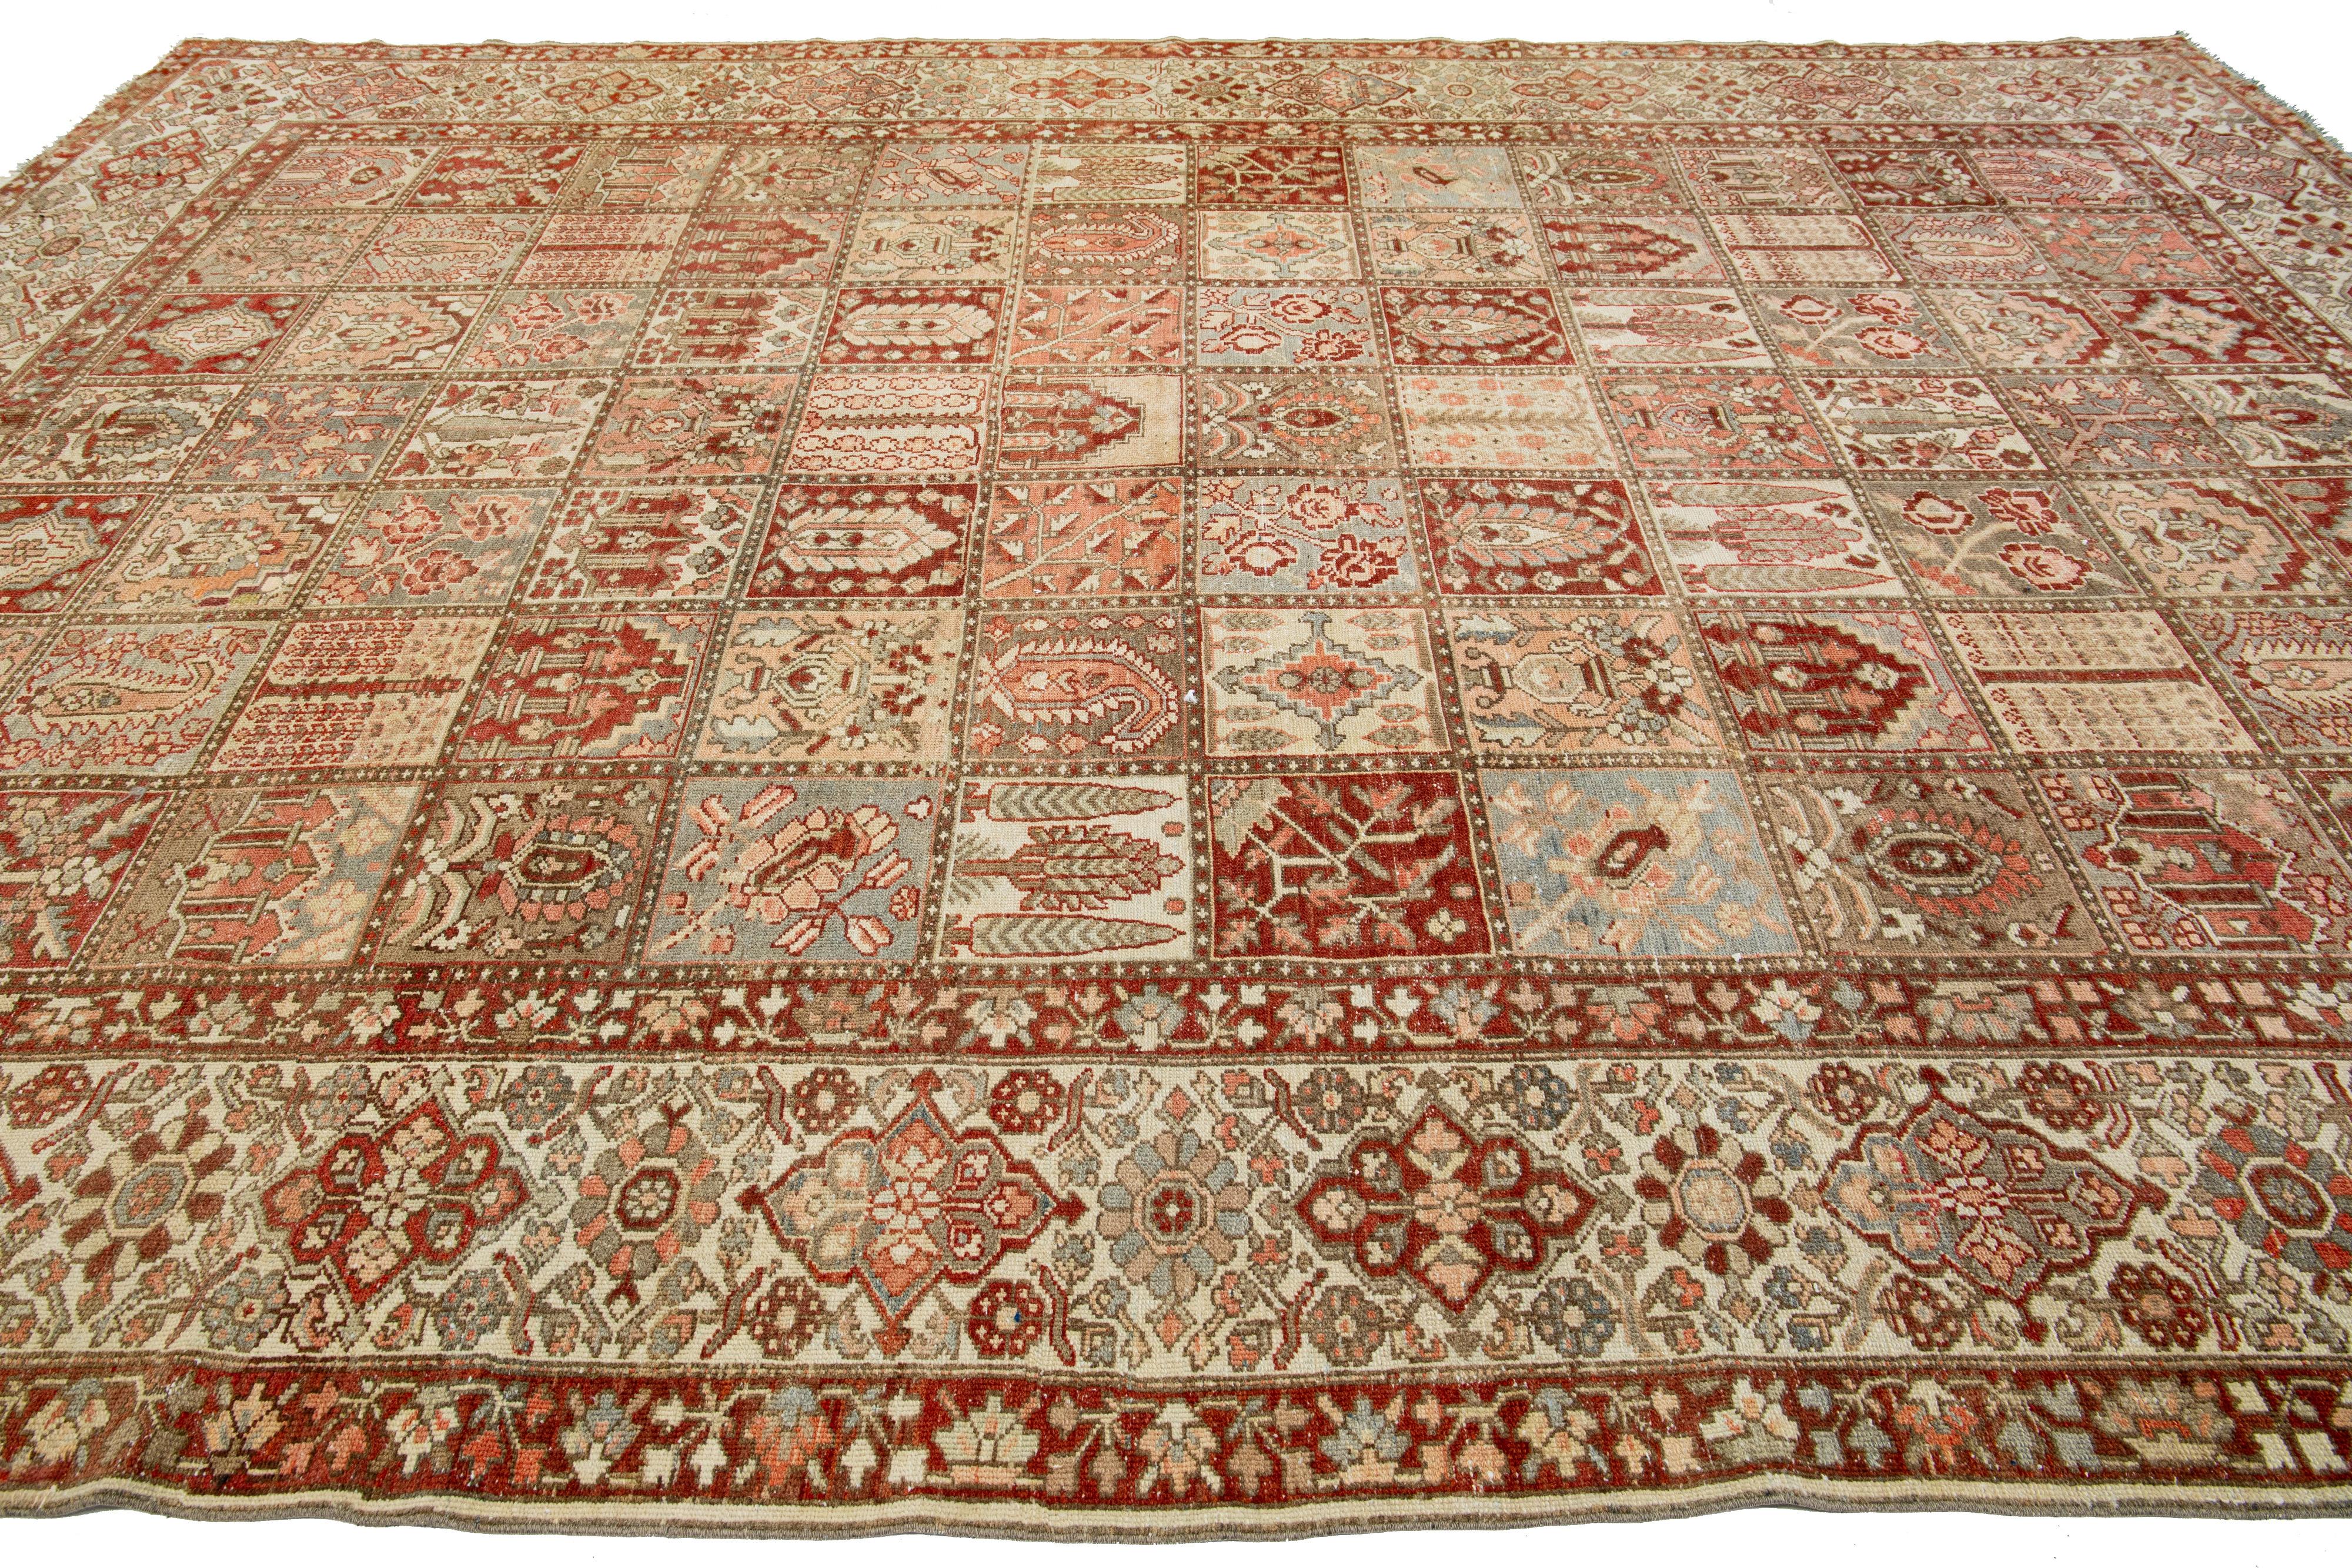 Multicolor Persian Bakhtiari Wool Rug Handcrafted in the 1920s In Good Condition For Sale In Norwalk, CT